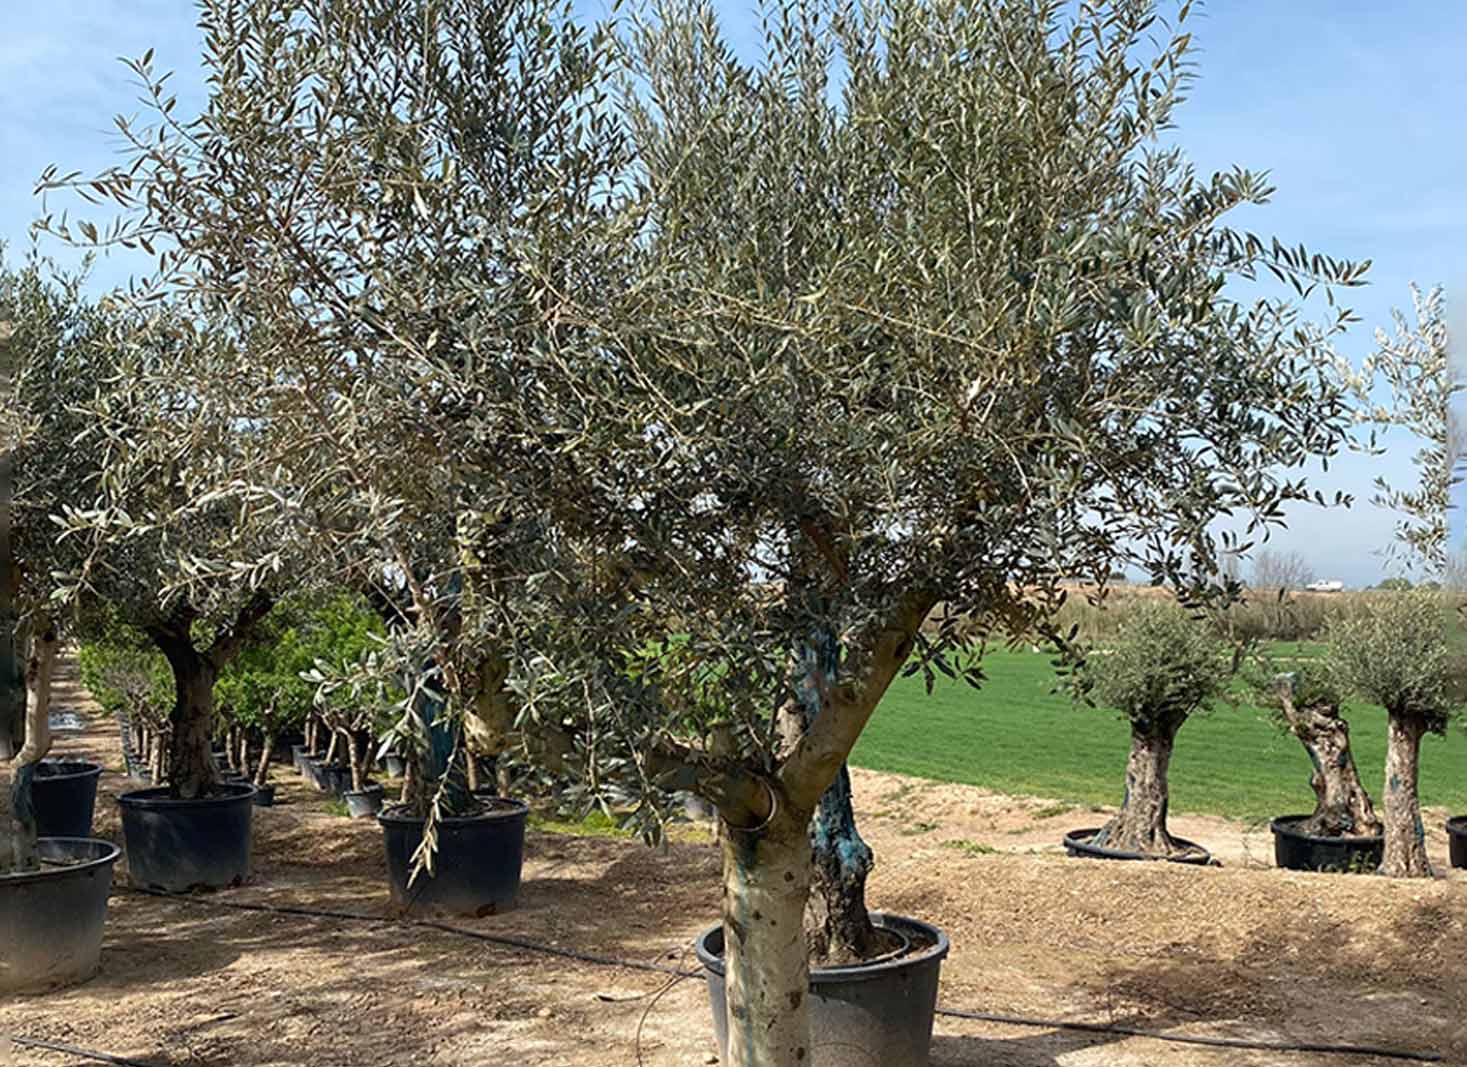 Pruning olive trees in pots